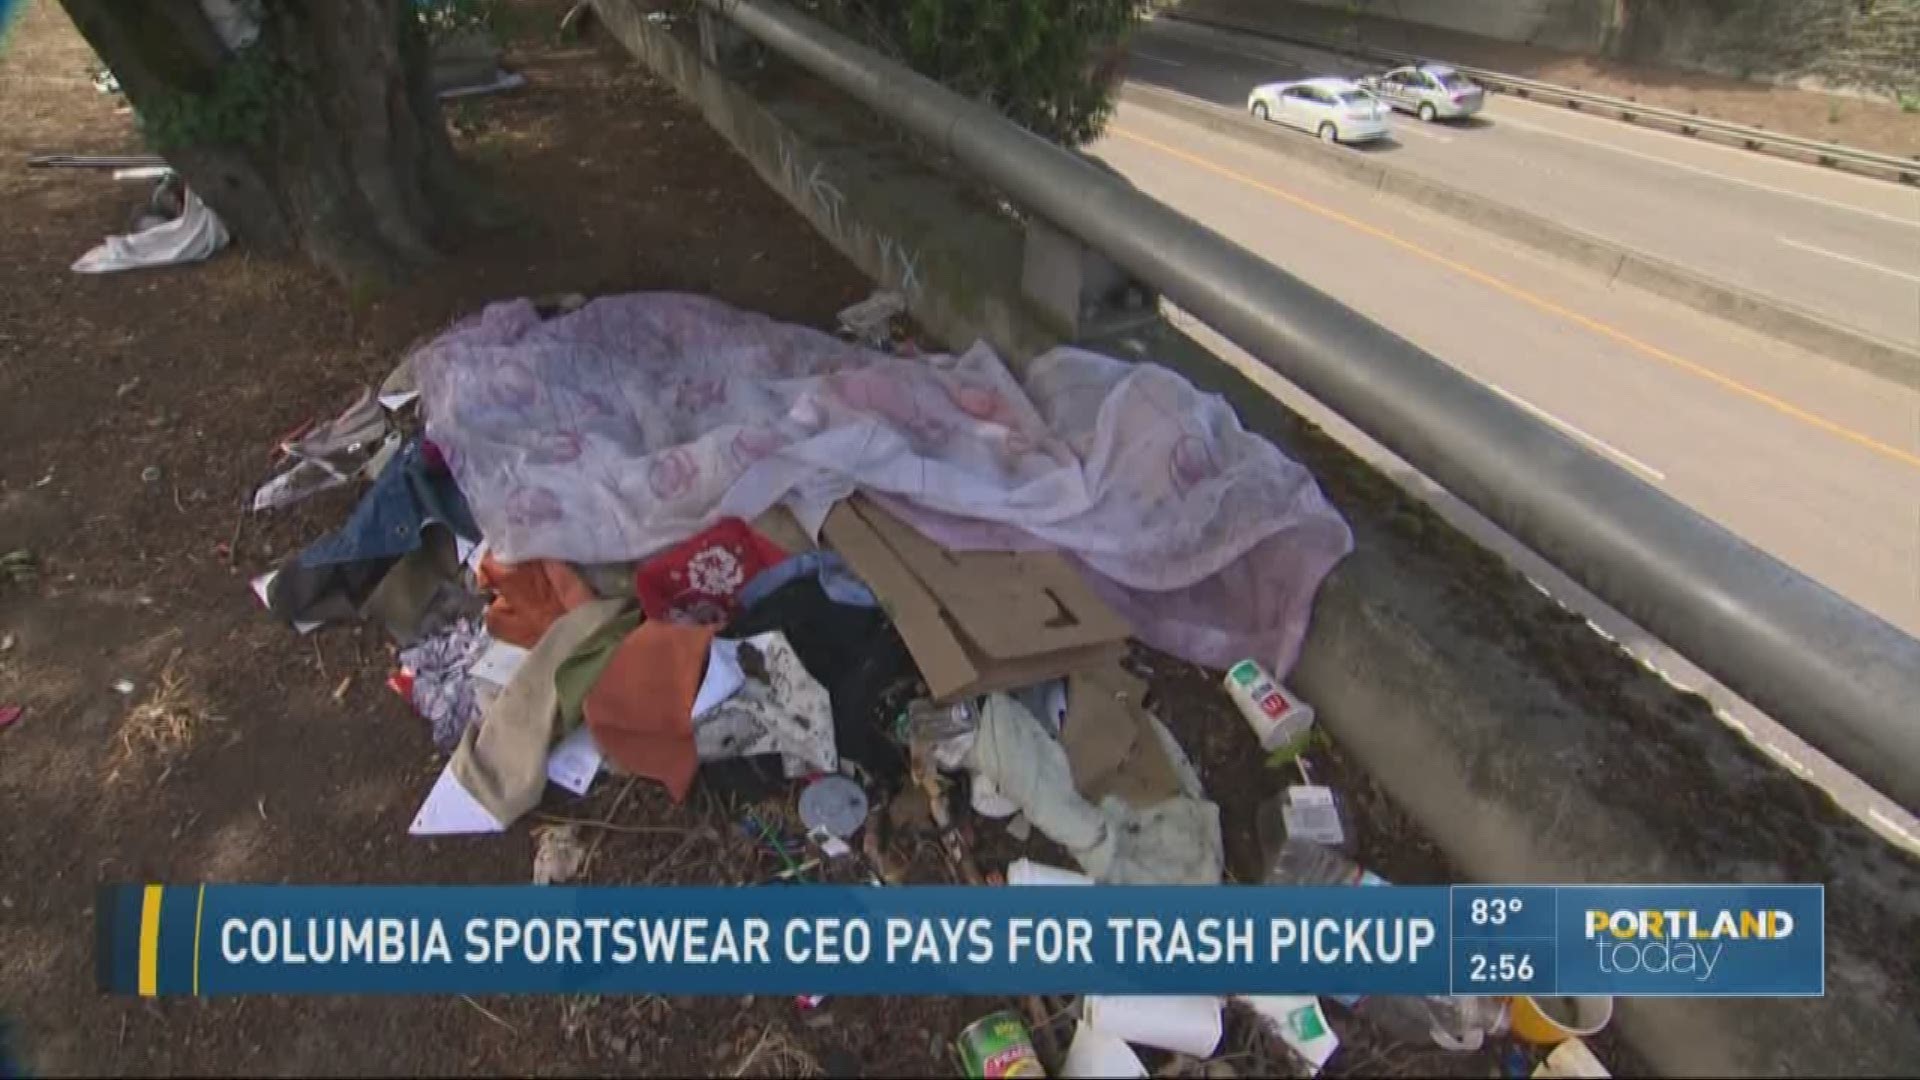 Columbia Sportswear CEO pays for trash pickup